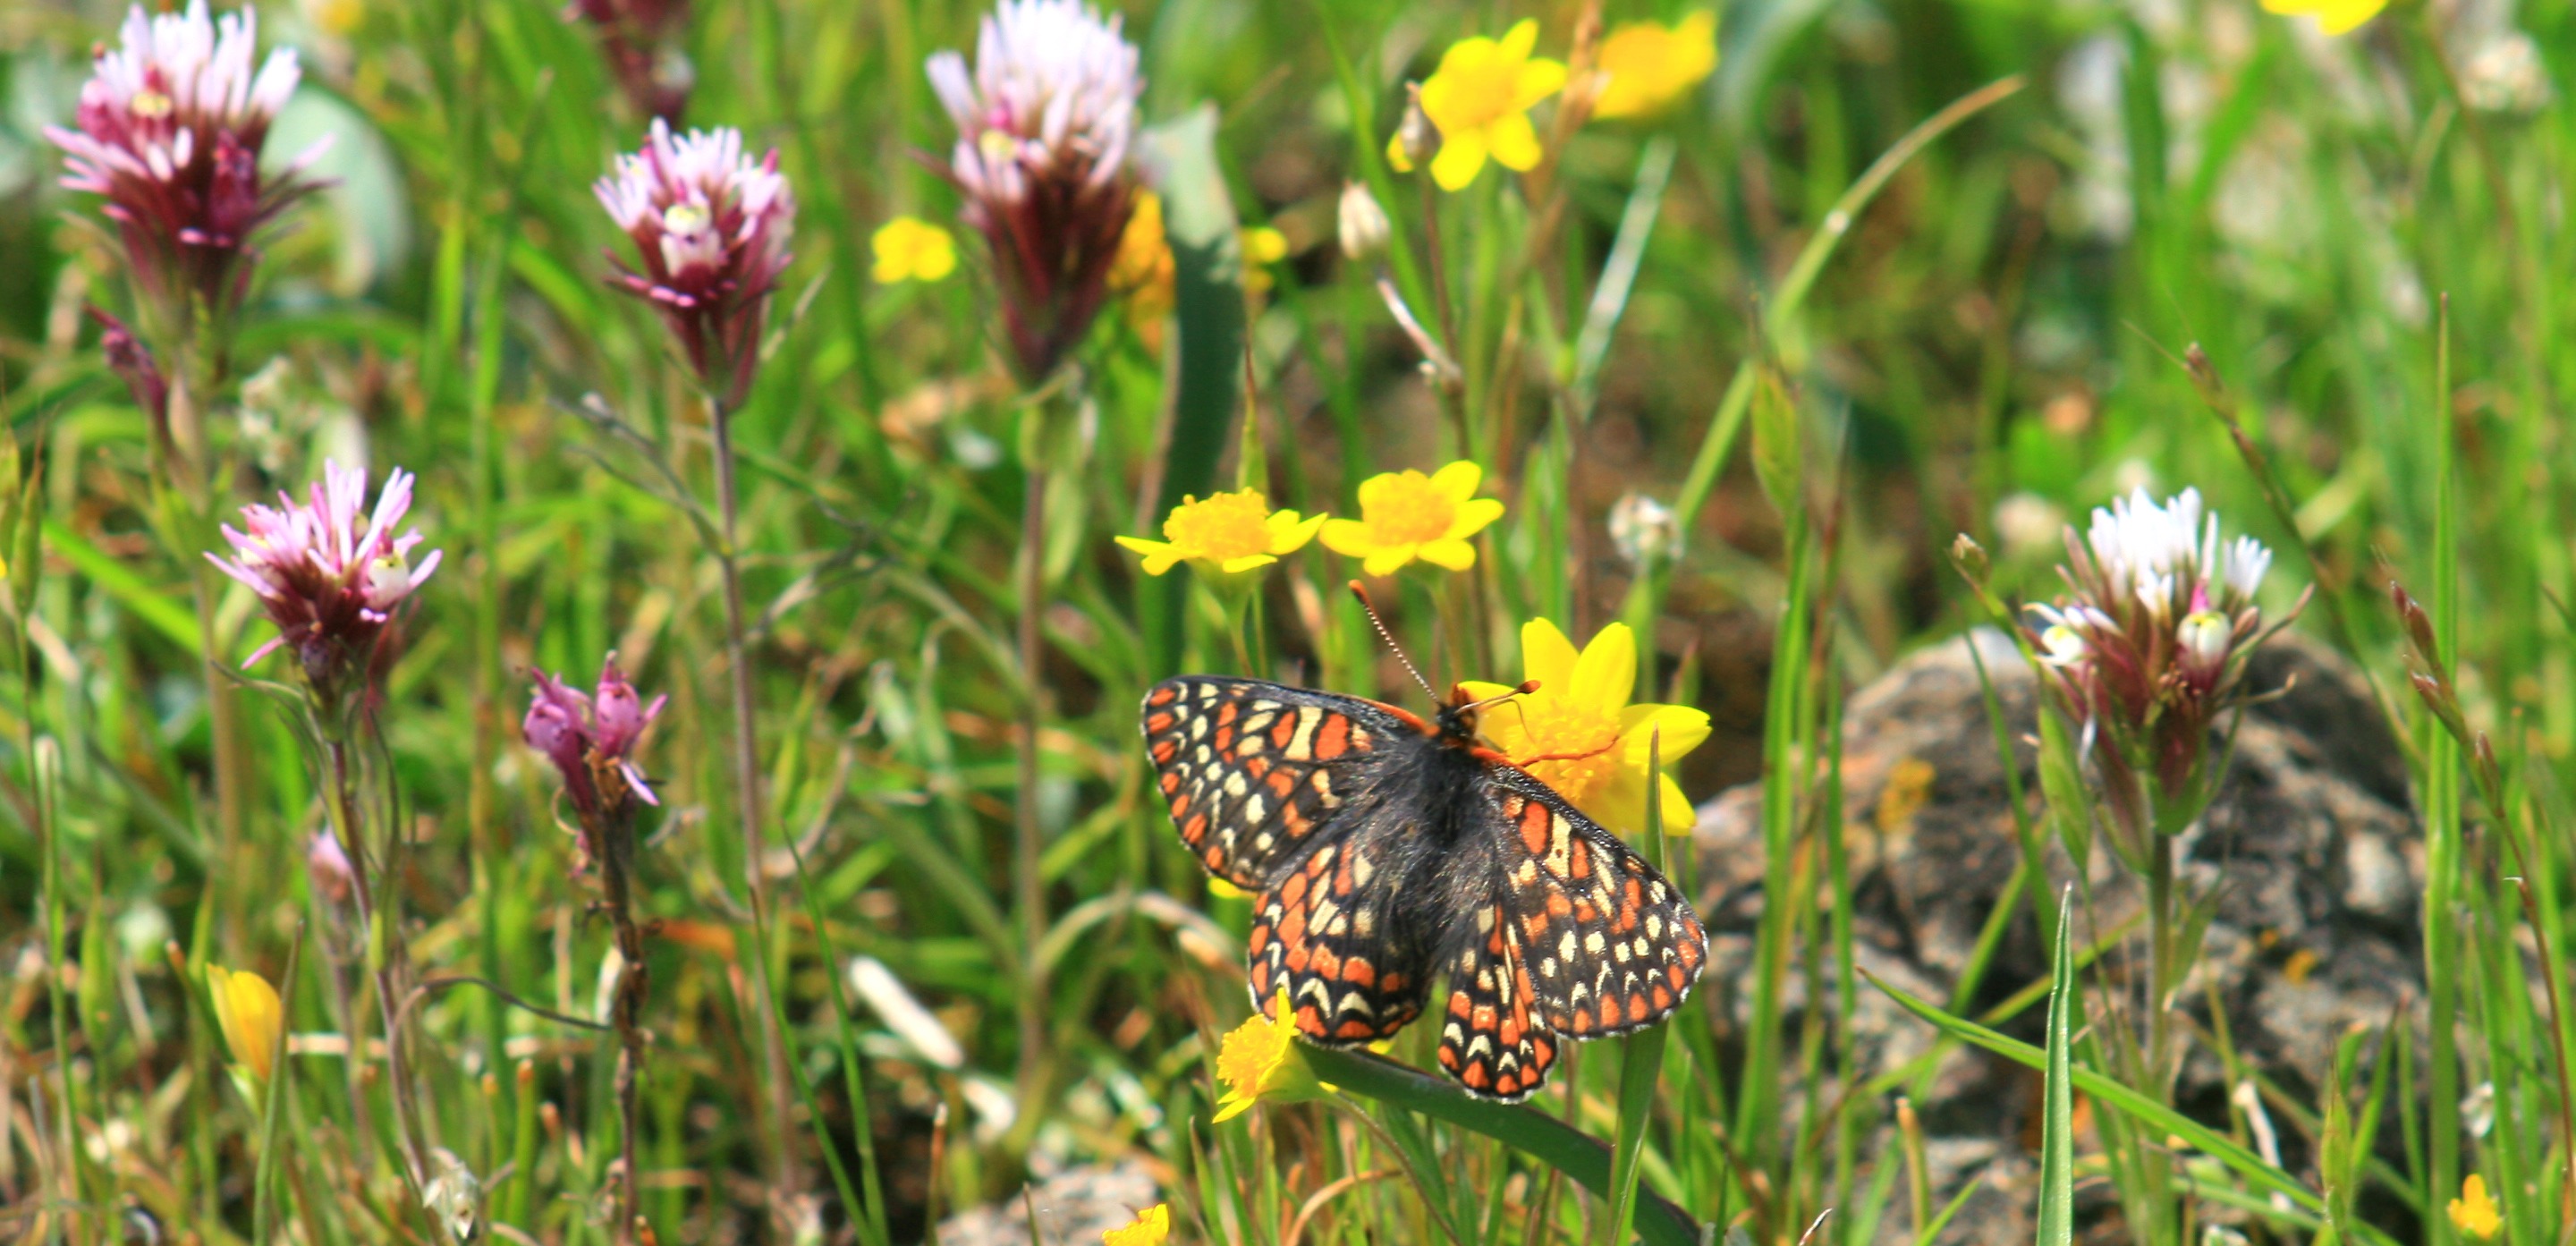 Coyote Ridge - Bay Checkerspot Butterfly - CH - 4-9-2011 - 24